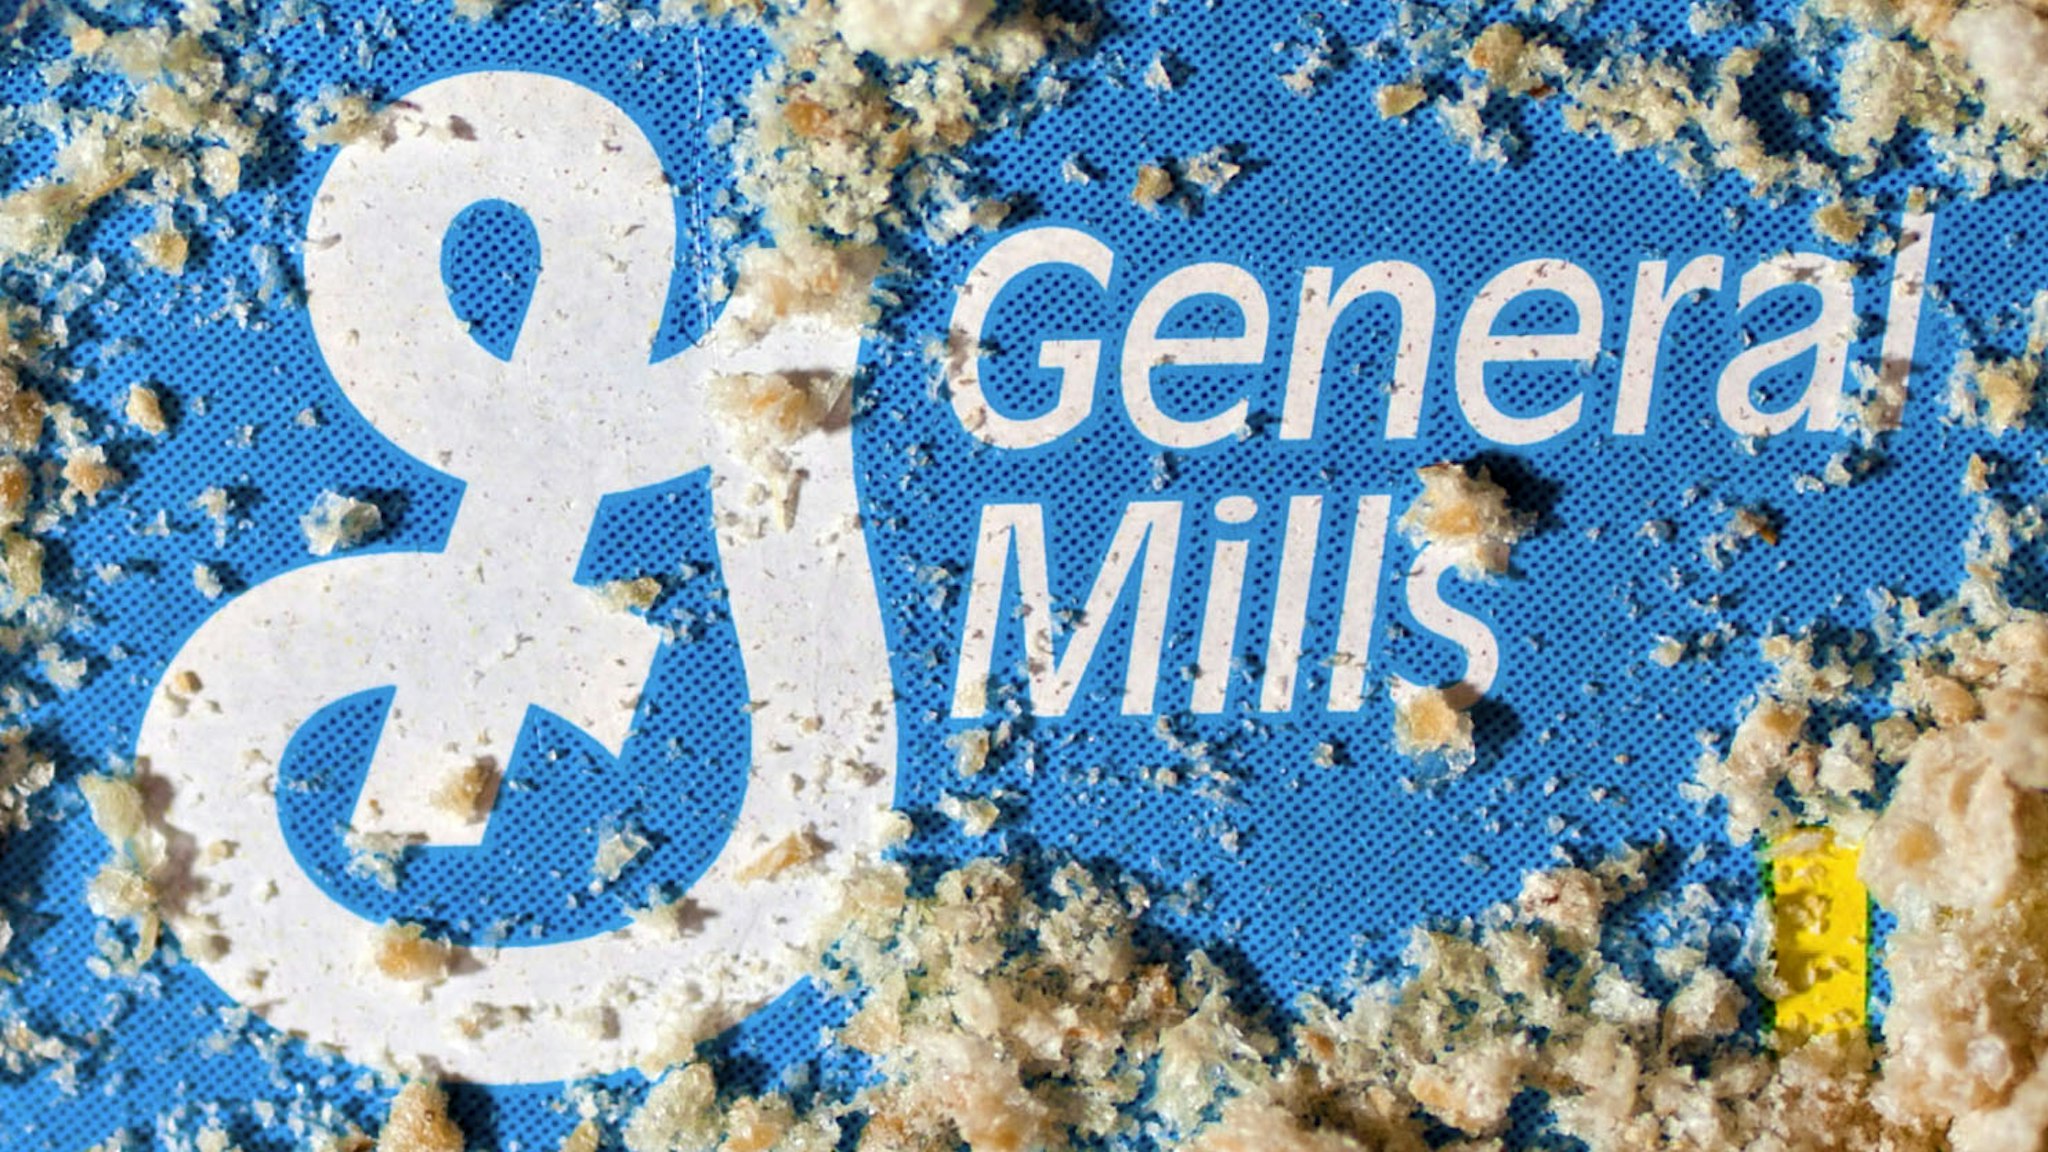 The General Mills Inc. logo is surrounded by Cheerios in this arranged photograph in Washington, D.C., U.S., on Friday, Feb. 17, 2012. General Mills Inc., the maker of Cheerios cereal and Yoplait yogurt, reduced its earnings forecast for its current fiscal year as weak demand and rising costs squeeze food producers.